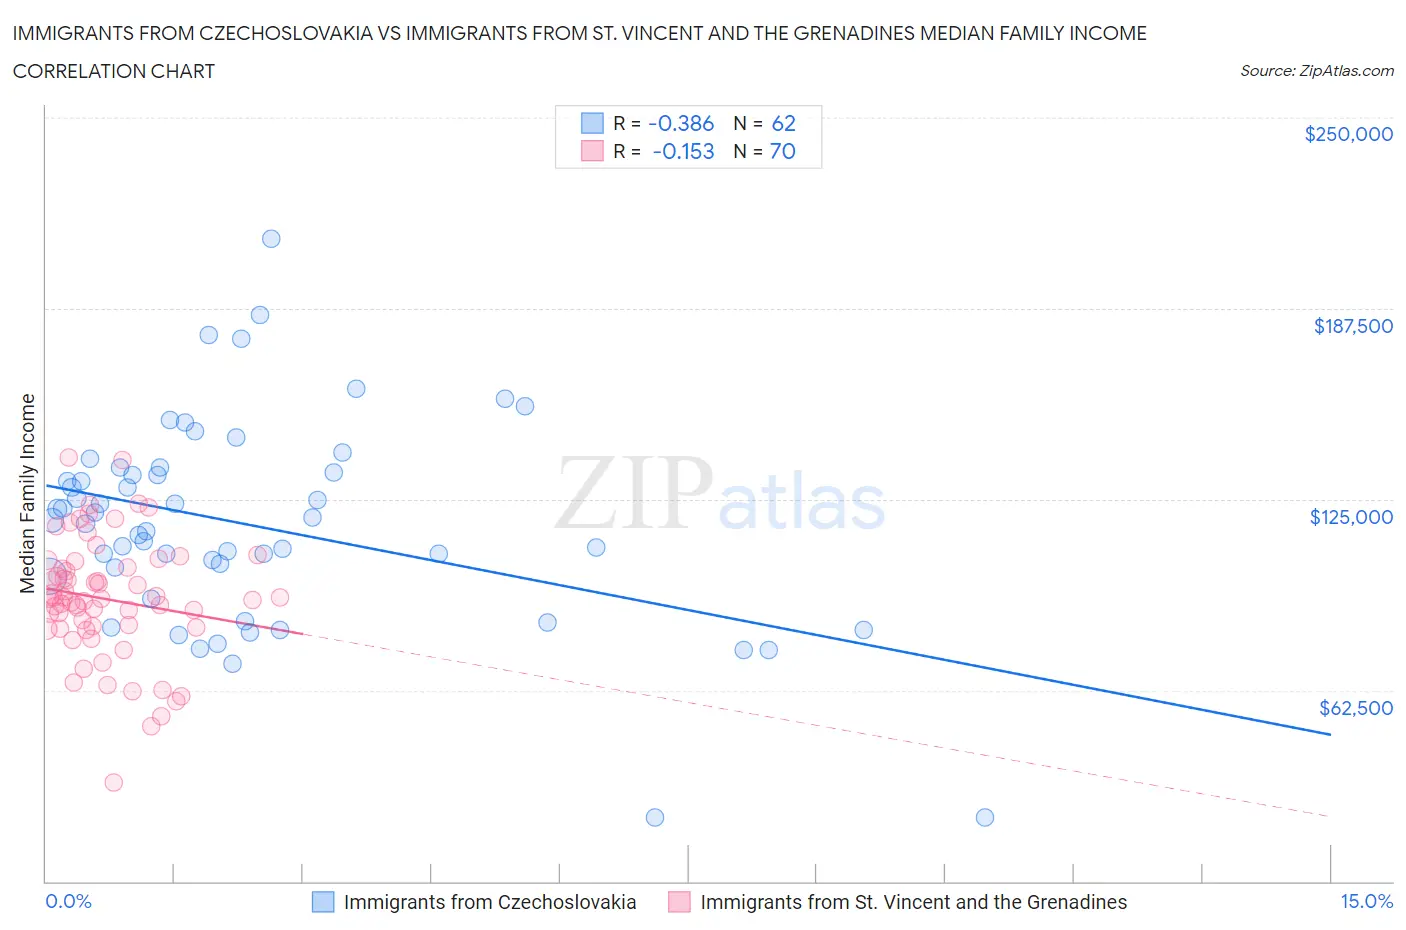 Immigrants from Czechoslovakia vs Immigrants from St. Vincent and the Grenadines Median Family Income